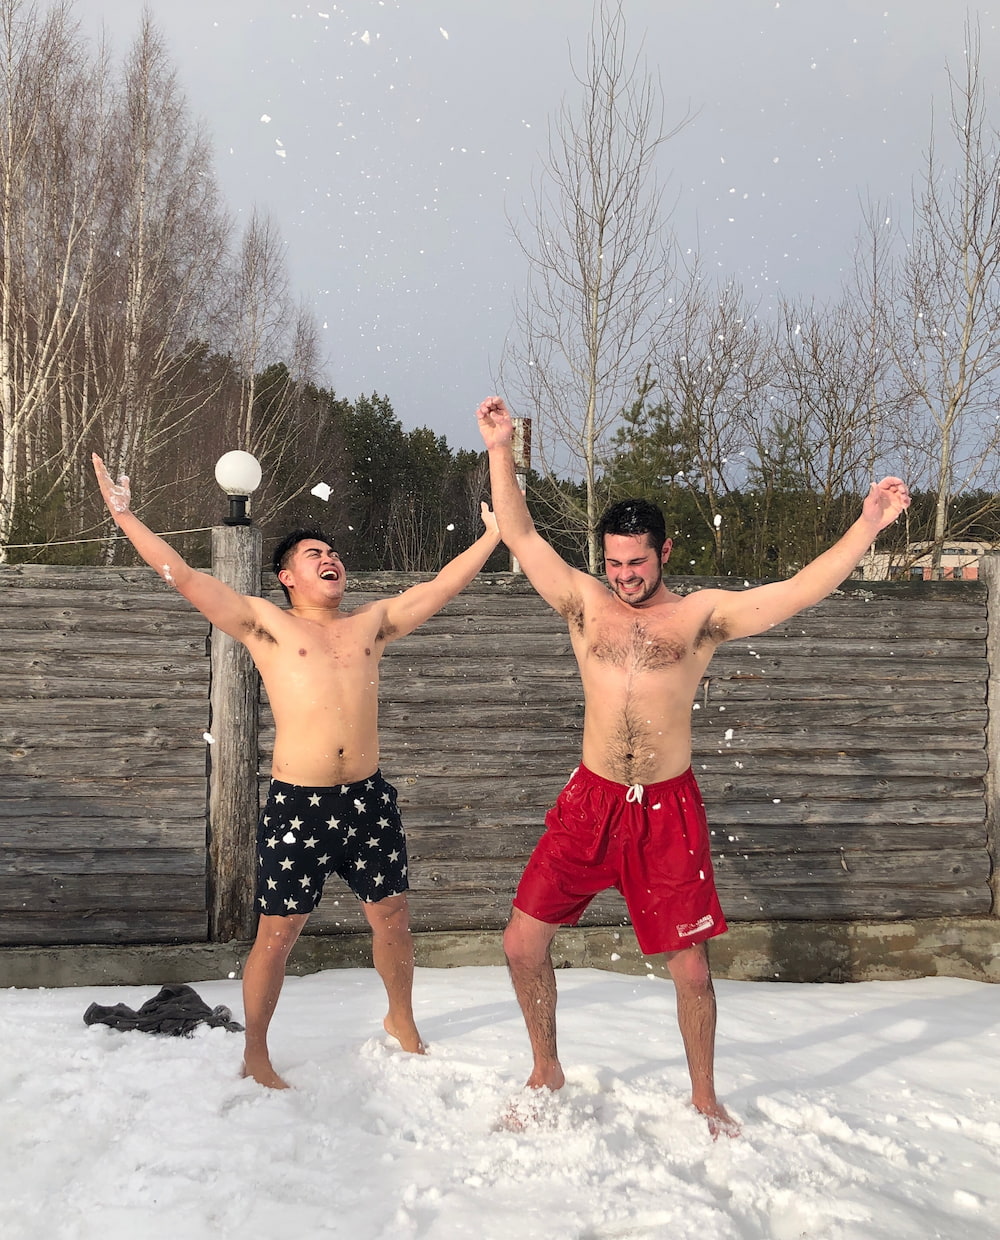 Students outside in the snow with their clothes off